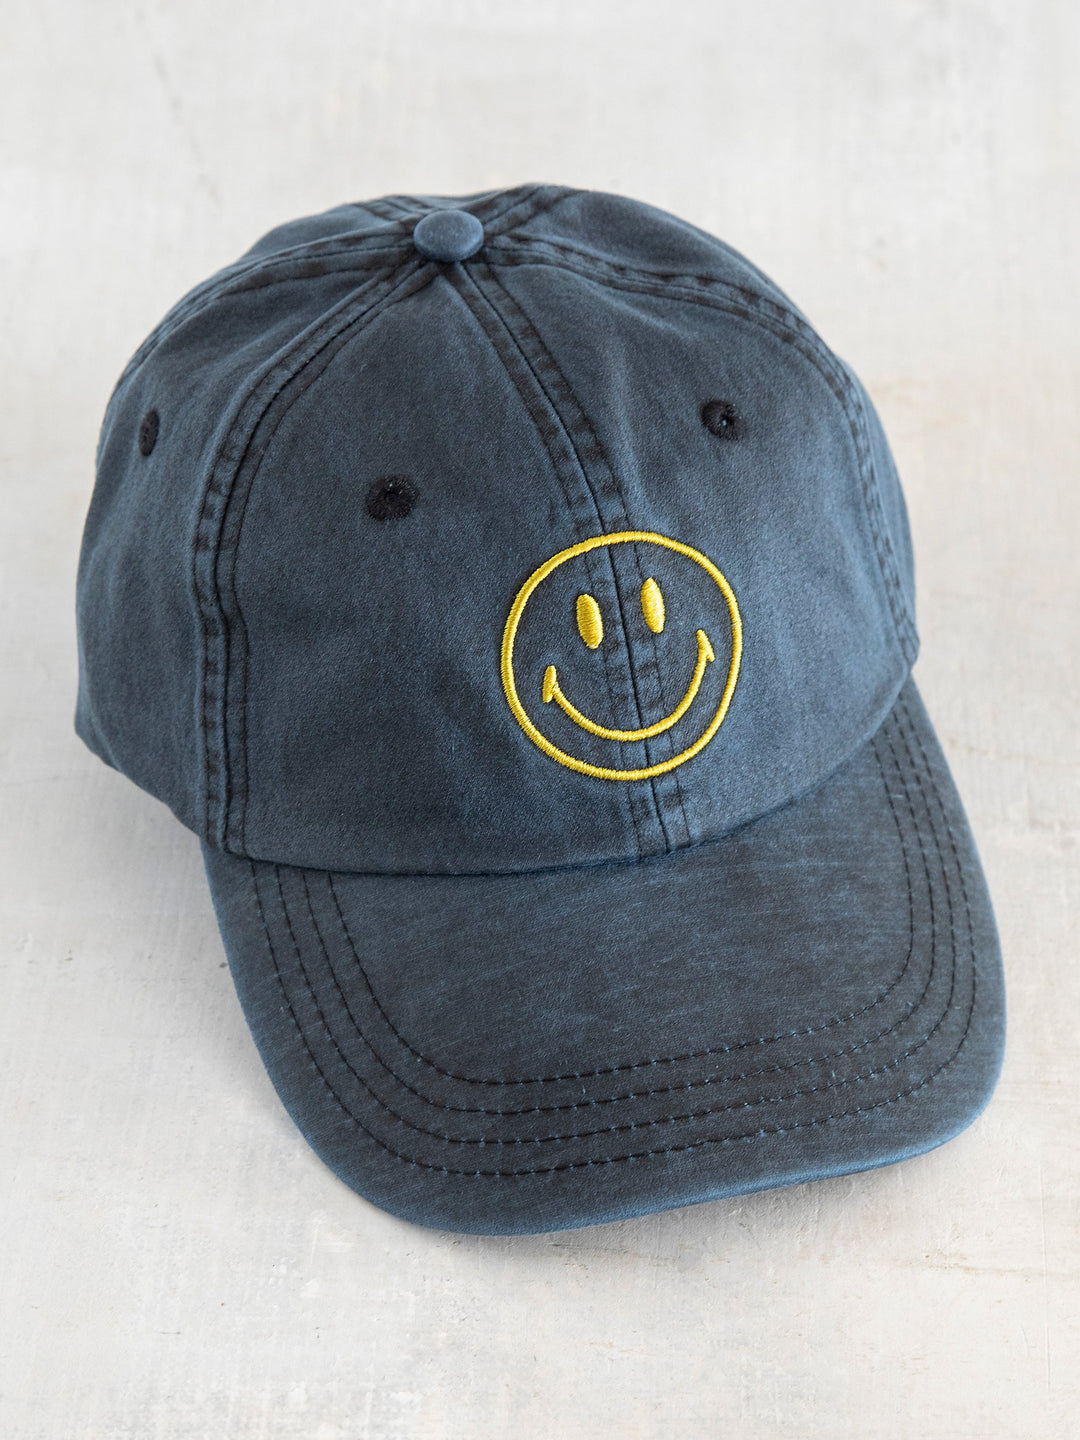 Embroidered Weathered Hangout Hat: Smiley Face